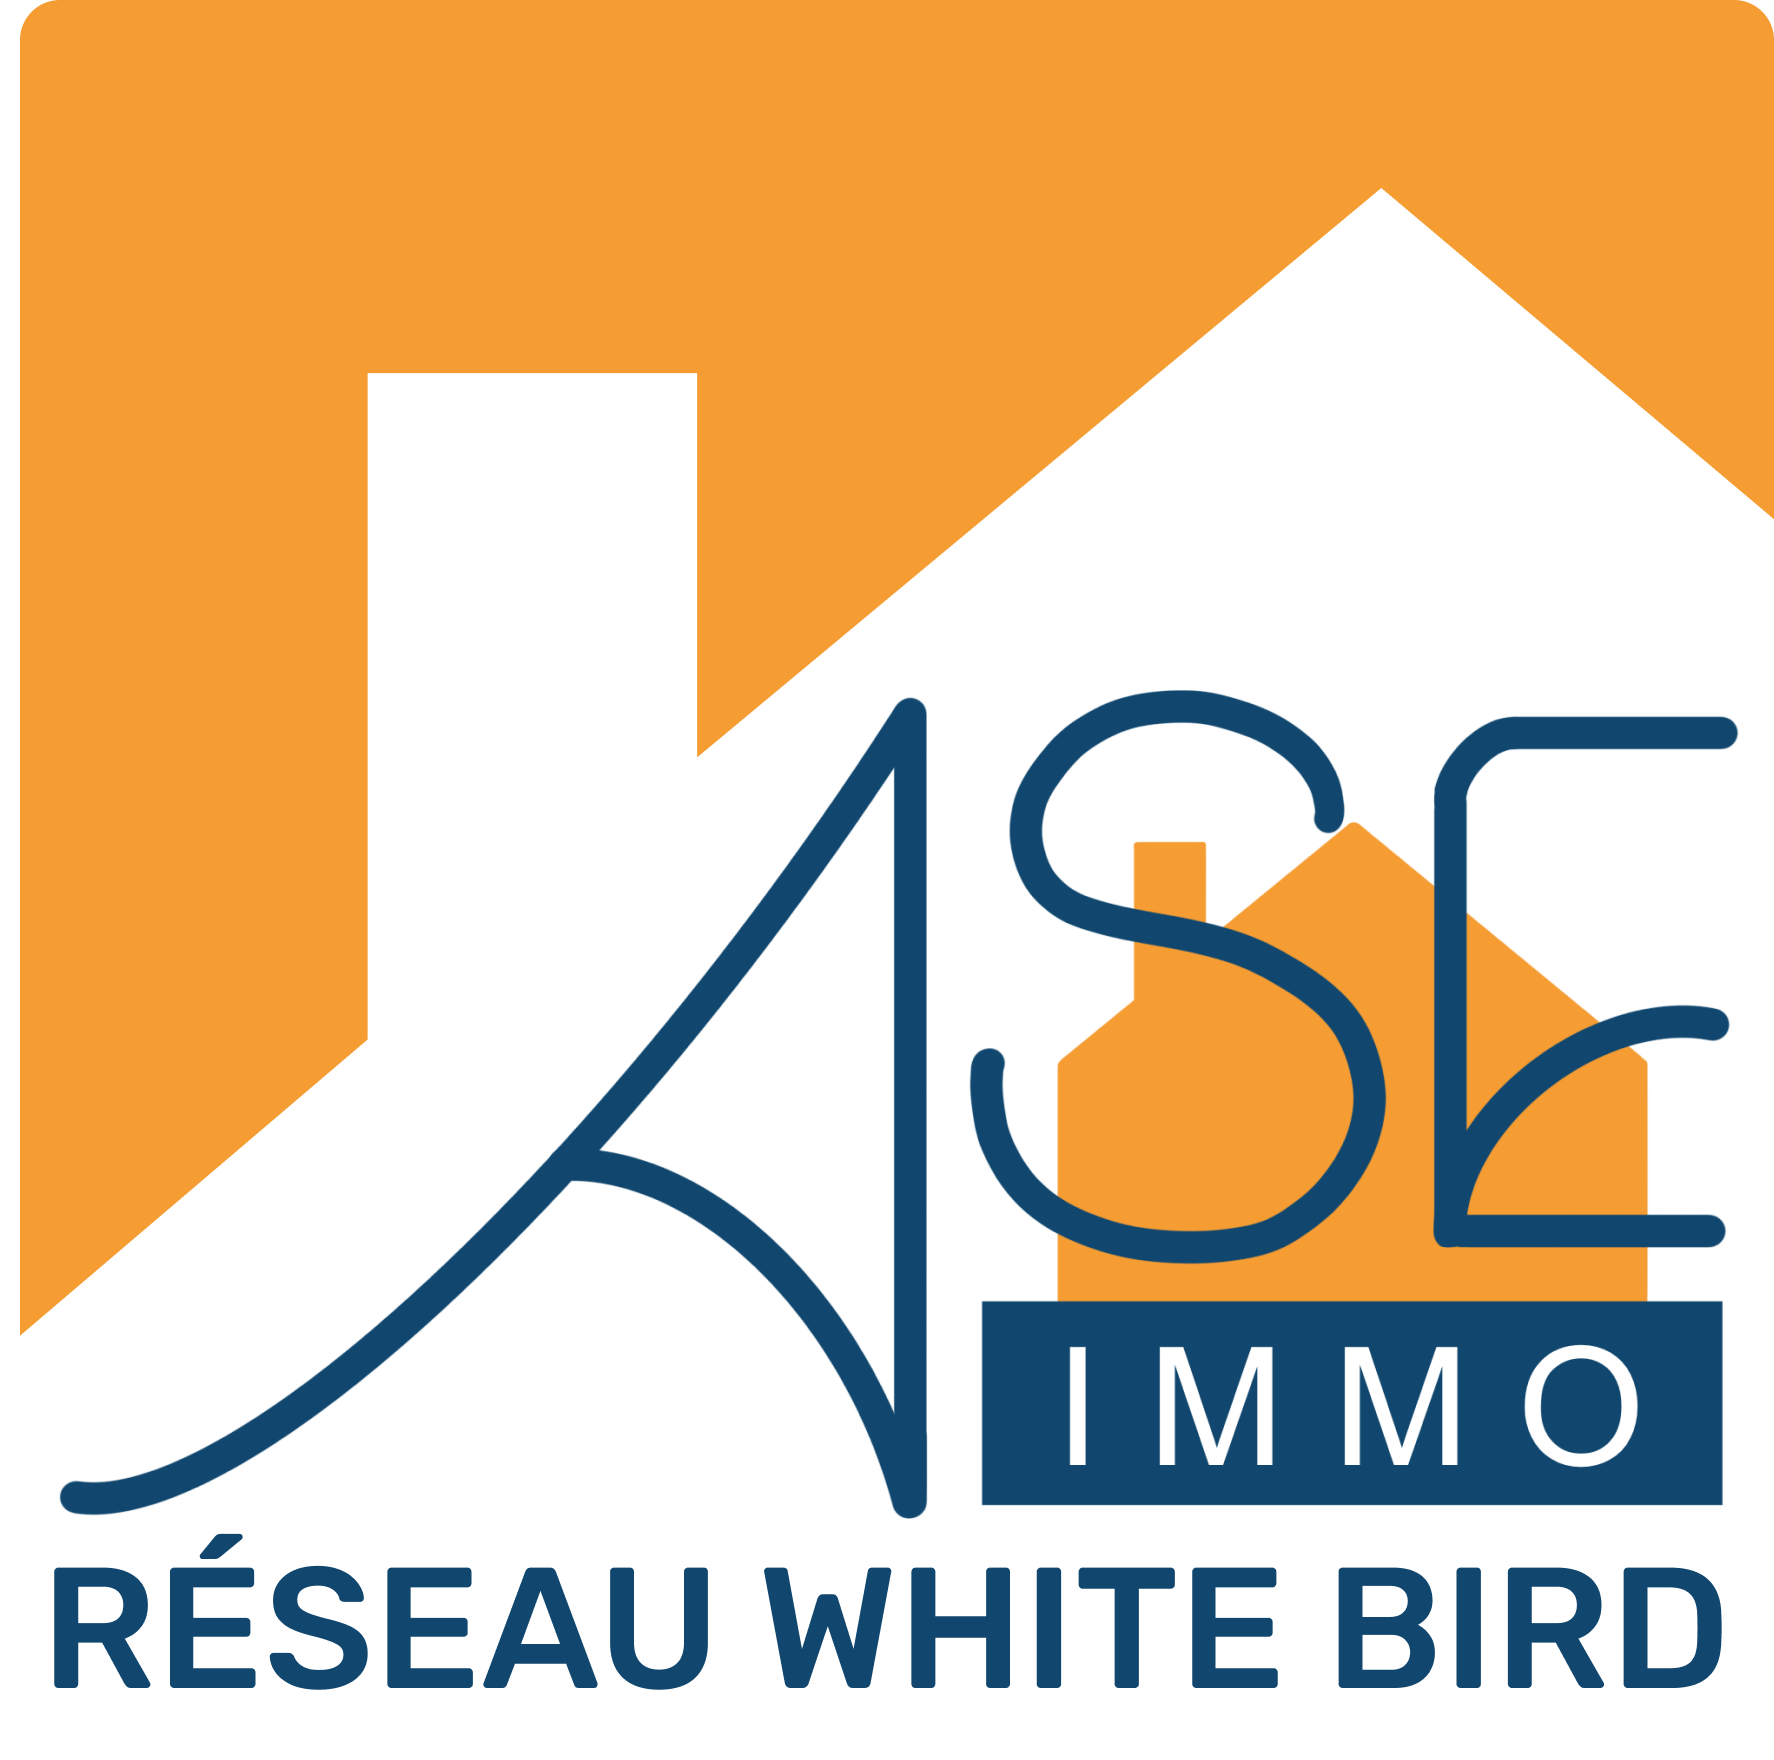 ase-immobilier-logo